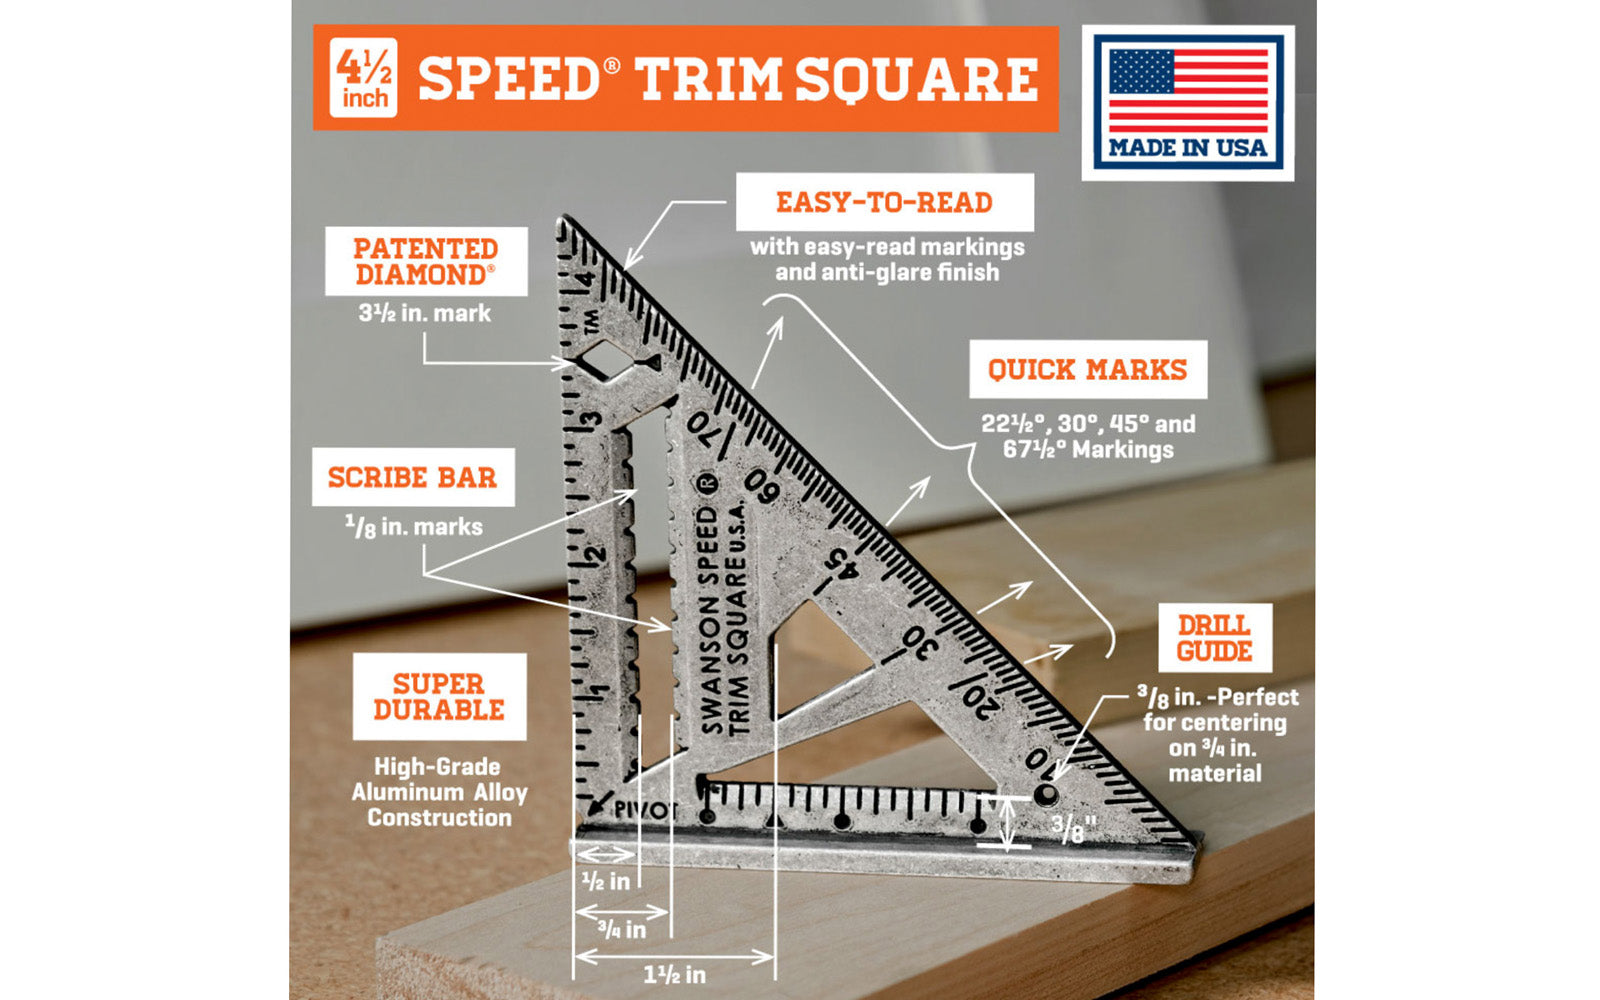 Swanson 4-1/2" Speed Trim Square. Engraved markings for easy reading. Great for cabinetry & molding. 22½°, 30°, 45° and 67½° markings easy angle finder. 3/8" Drill Guide for self-centering drill bits on 3/4" stock. Matte finish to prevent glare. Model S0145. 038987014512. Made in USA